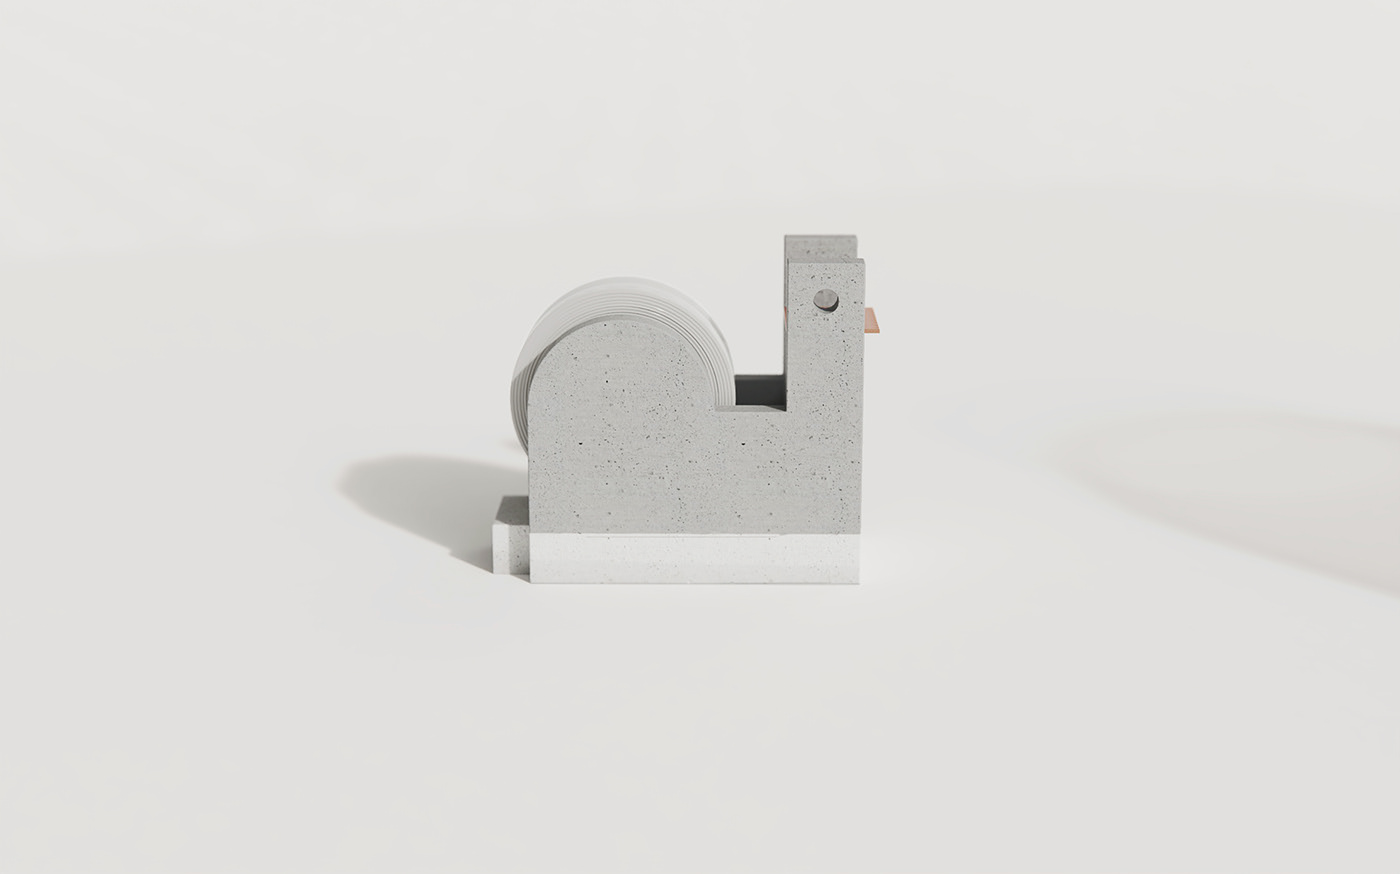 industrial design  product product design  snail Stationary design Stationery tape tape dispenser